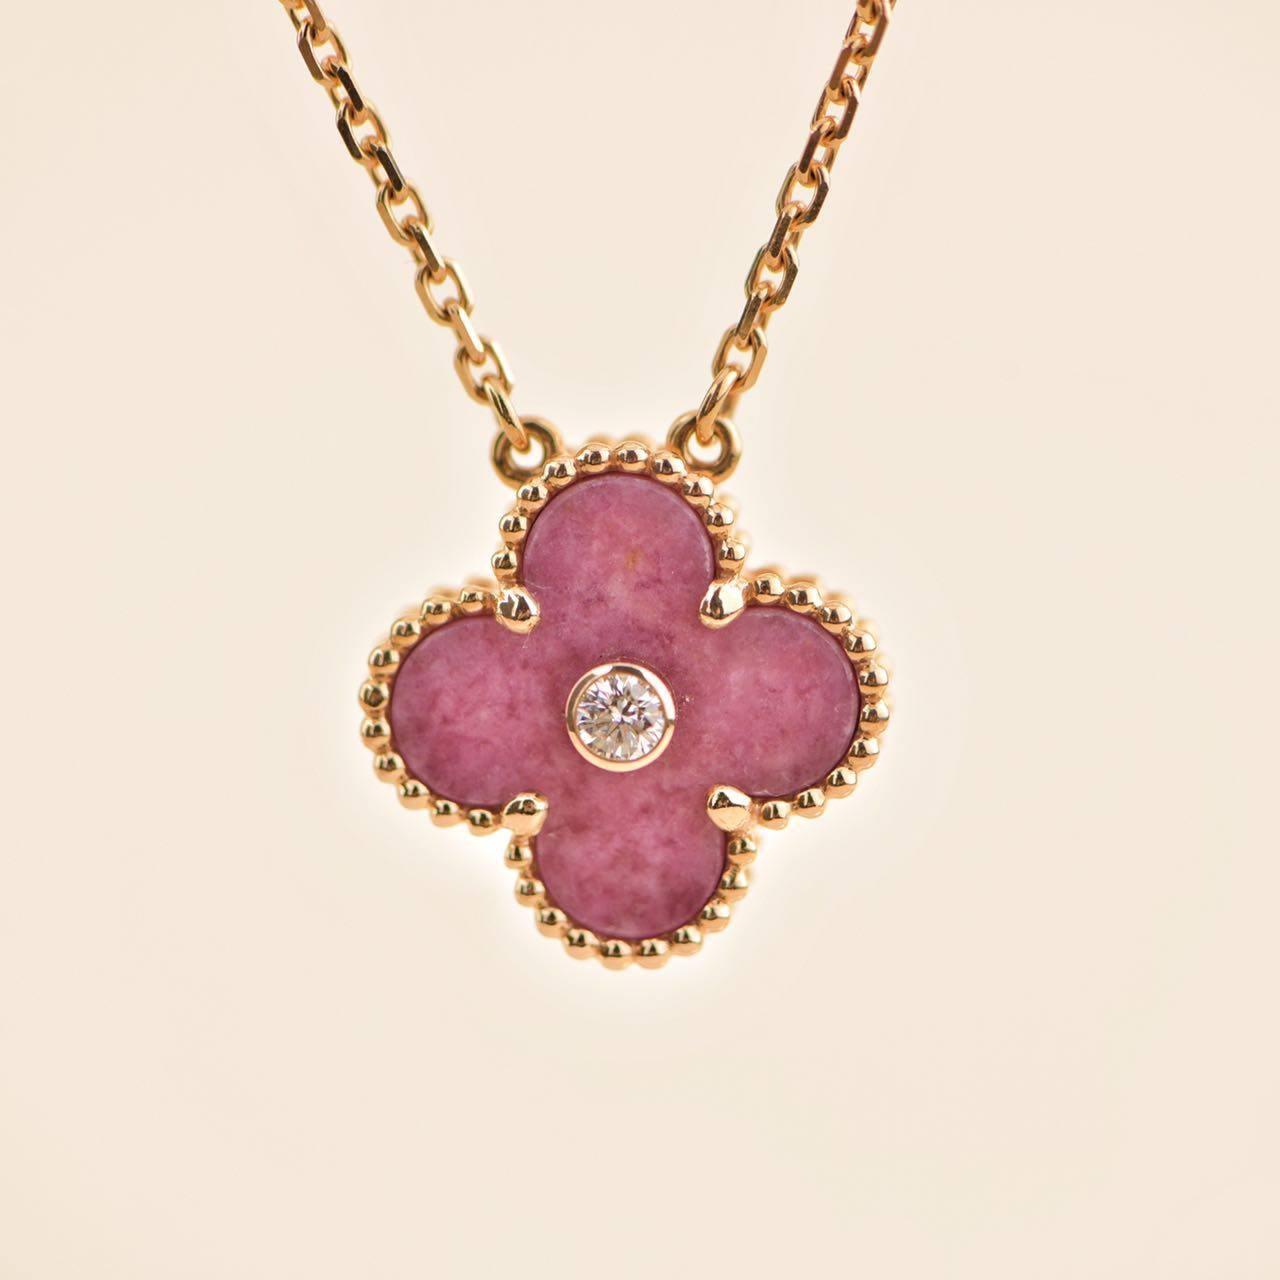 Limited edition released in 2021 as the holiday pendant, rhodonite stone, made in 18k pink gold, VCA doesn't create this version anymore, truly a collective piece!

SKU: AT-1513
Brand:  Van Cleef & Arpels
Date: 